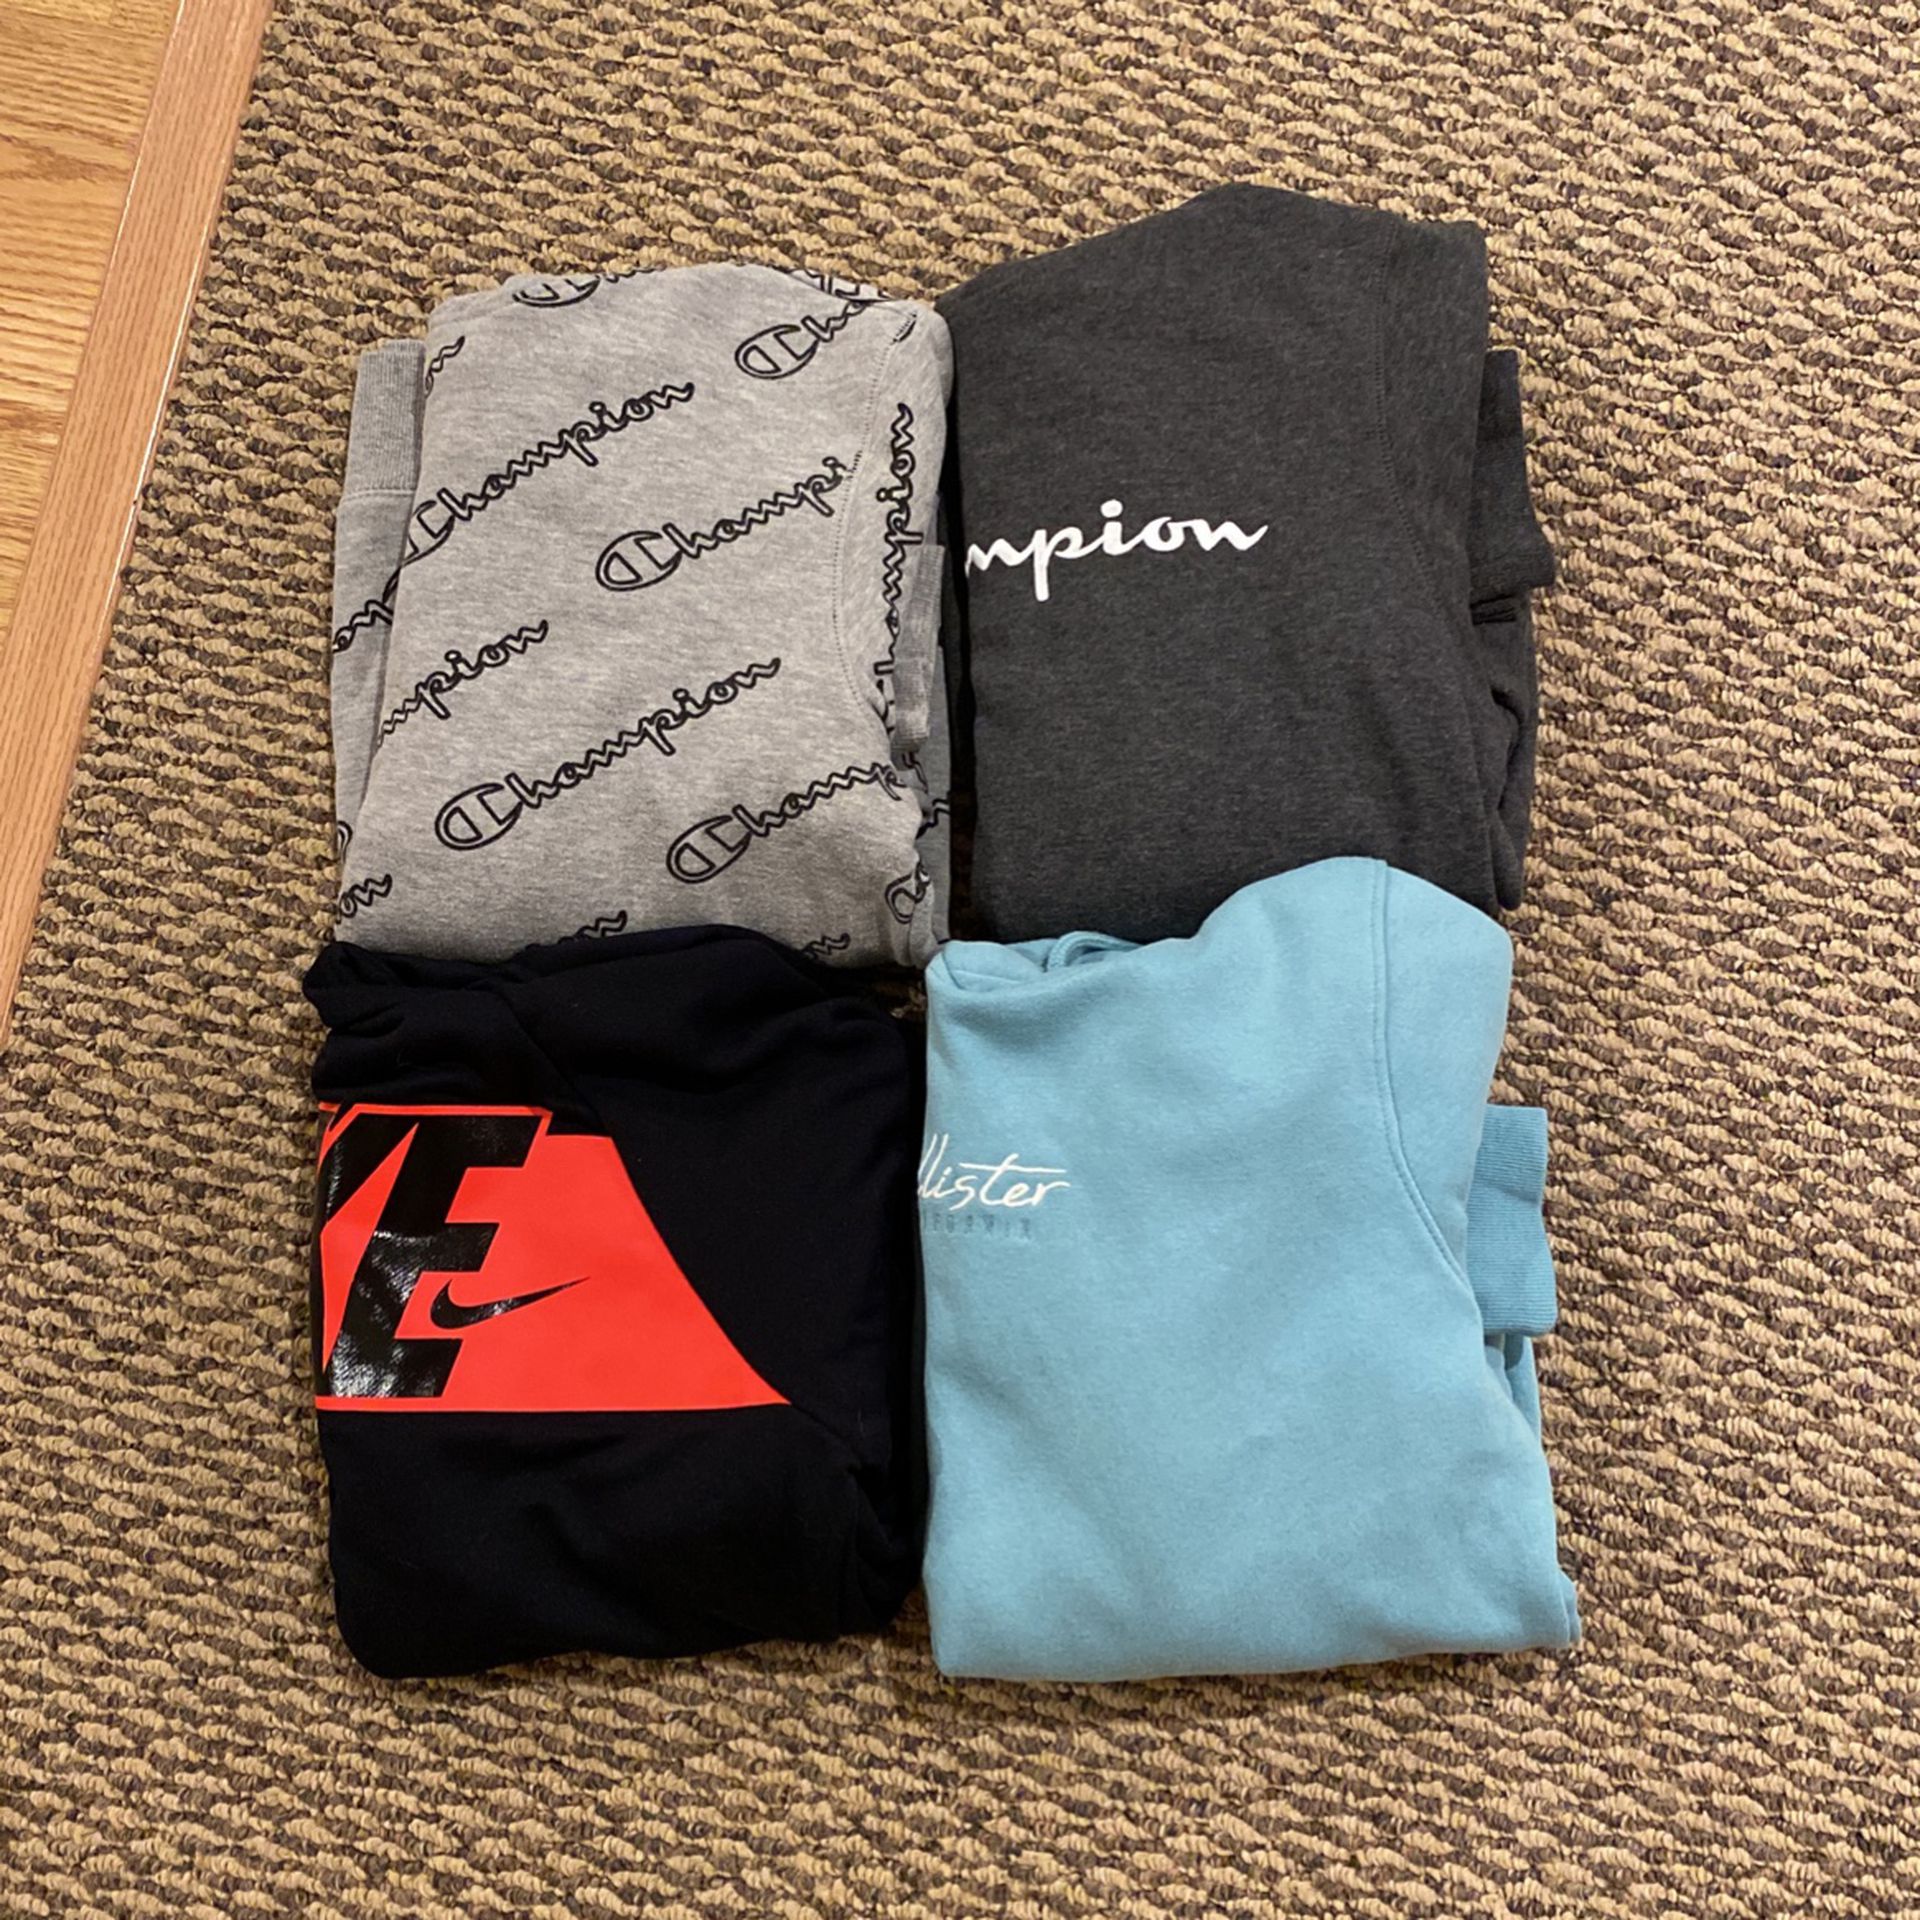 Hoodies (Youth Extra Large, 1 Nike, 2 Champion & 1 Hollister)